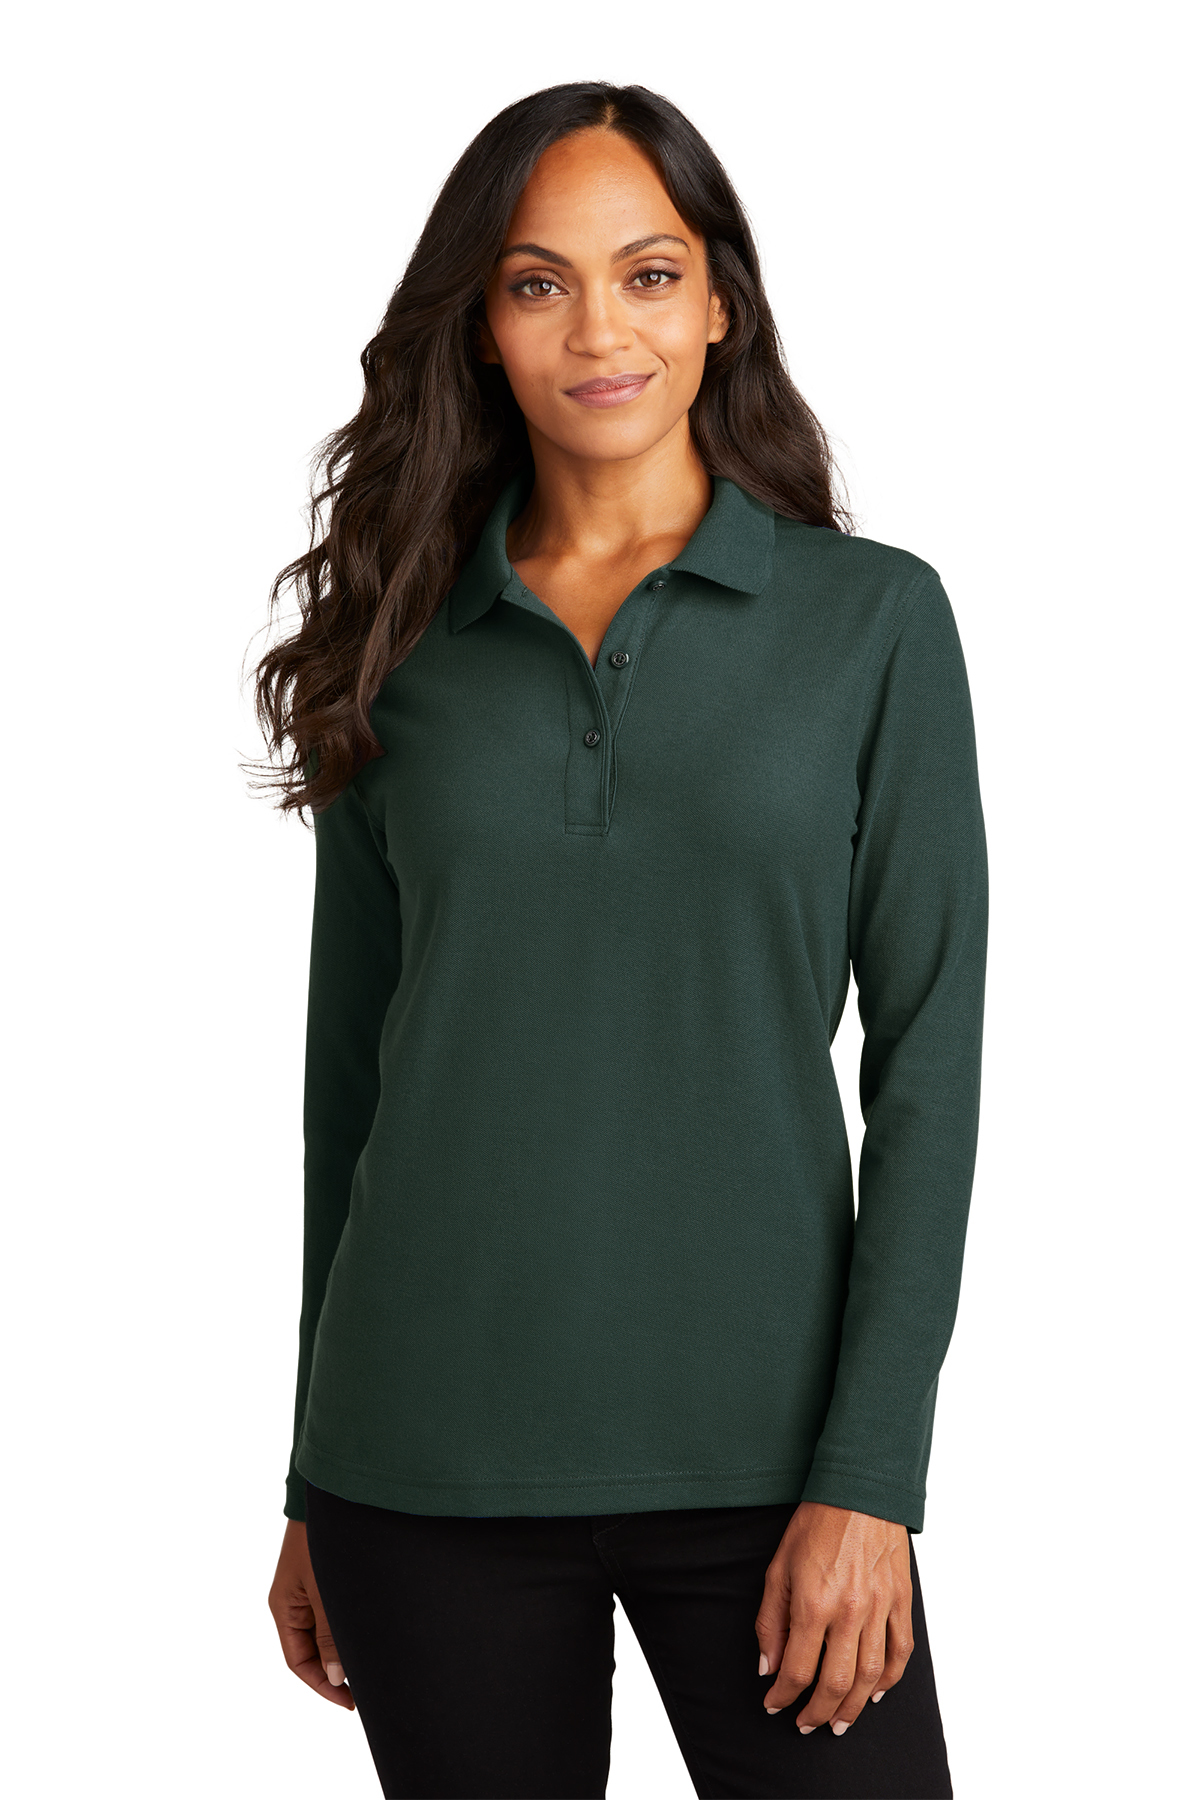 Port Authority Ladies Silk Touch™ Long Sleeve Polo | Product | Company ...